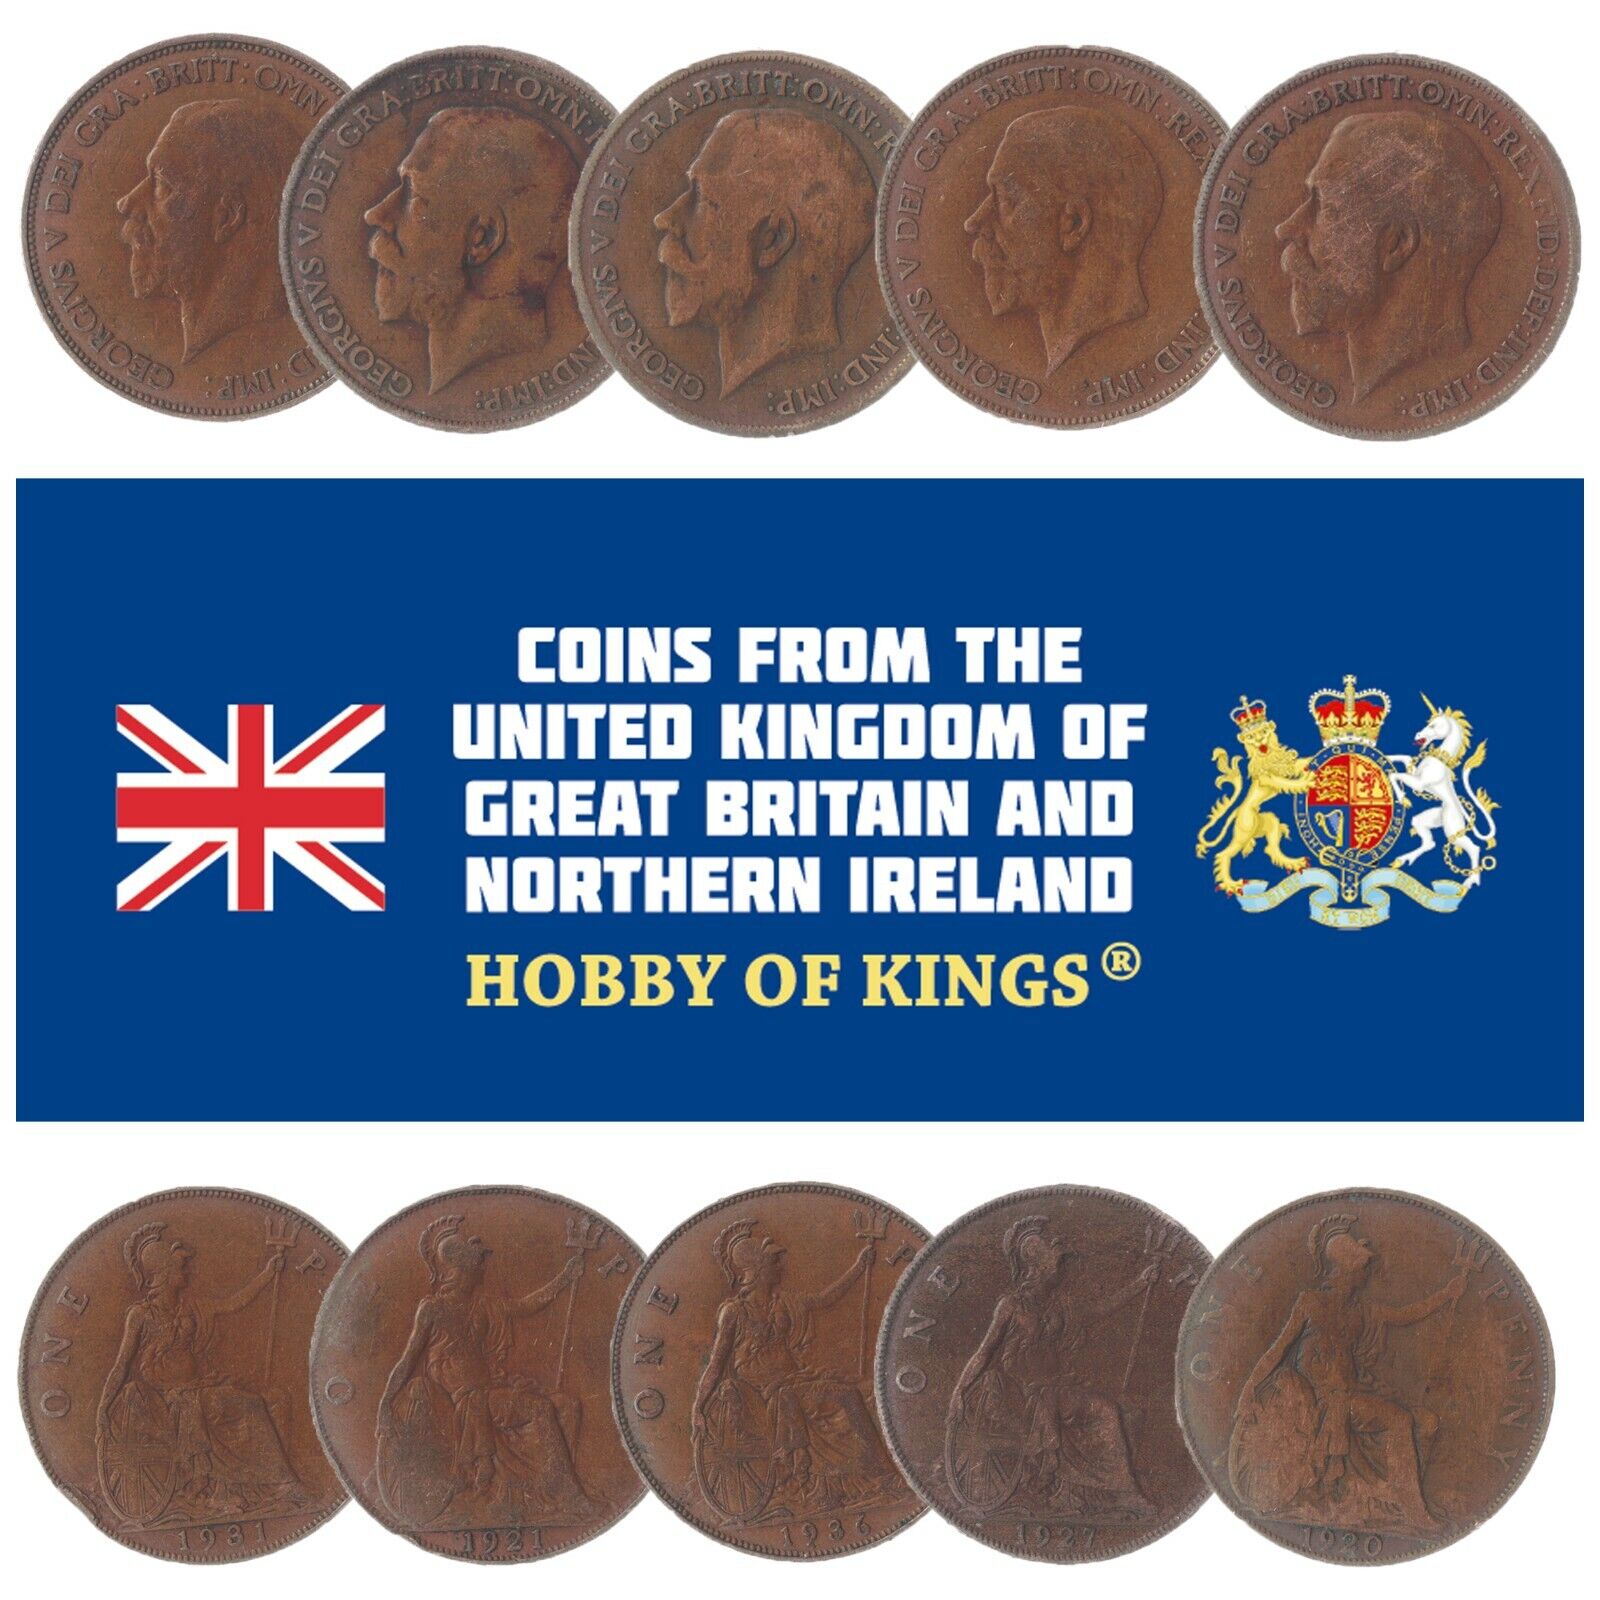 LOT OF 10 GREAT BRITAIN UNITED KINGDOM 1 PENNY COINS, KING GEORGE V 1911 - 1936